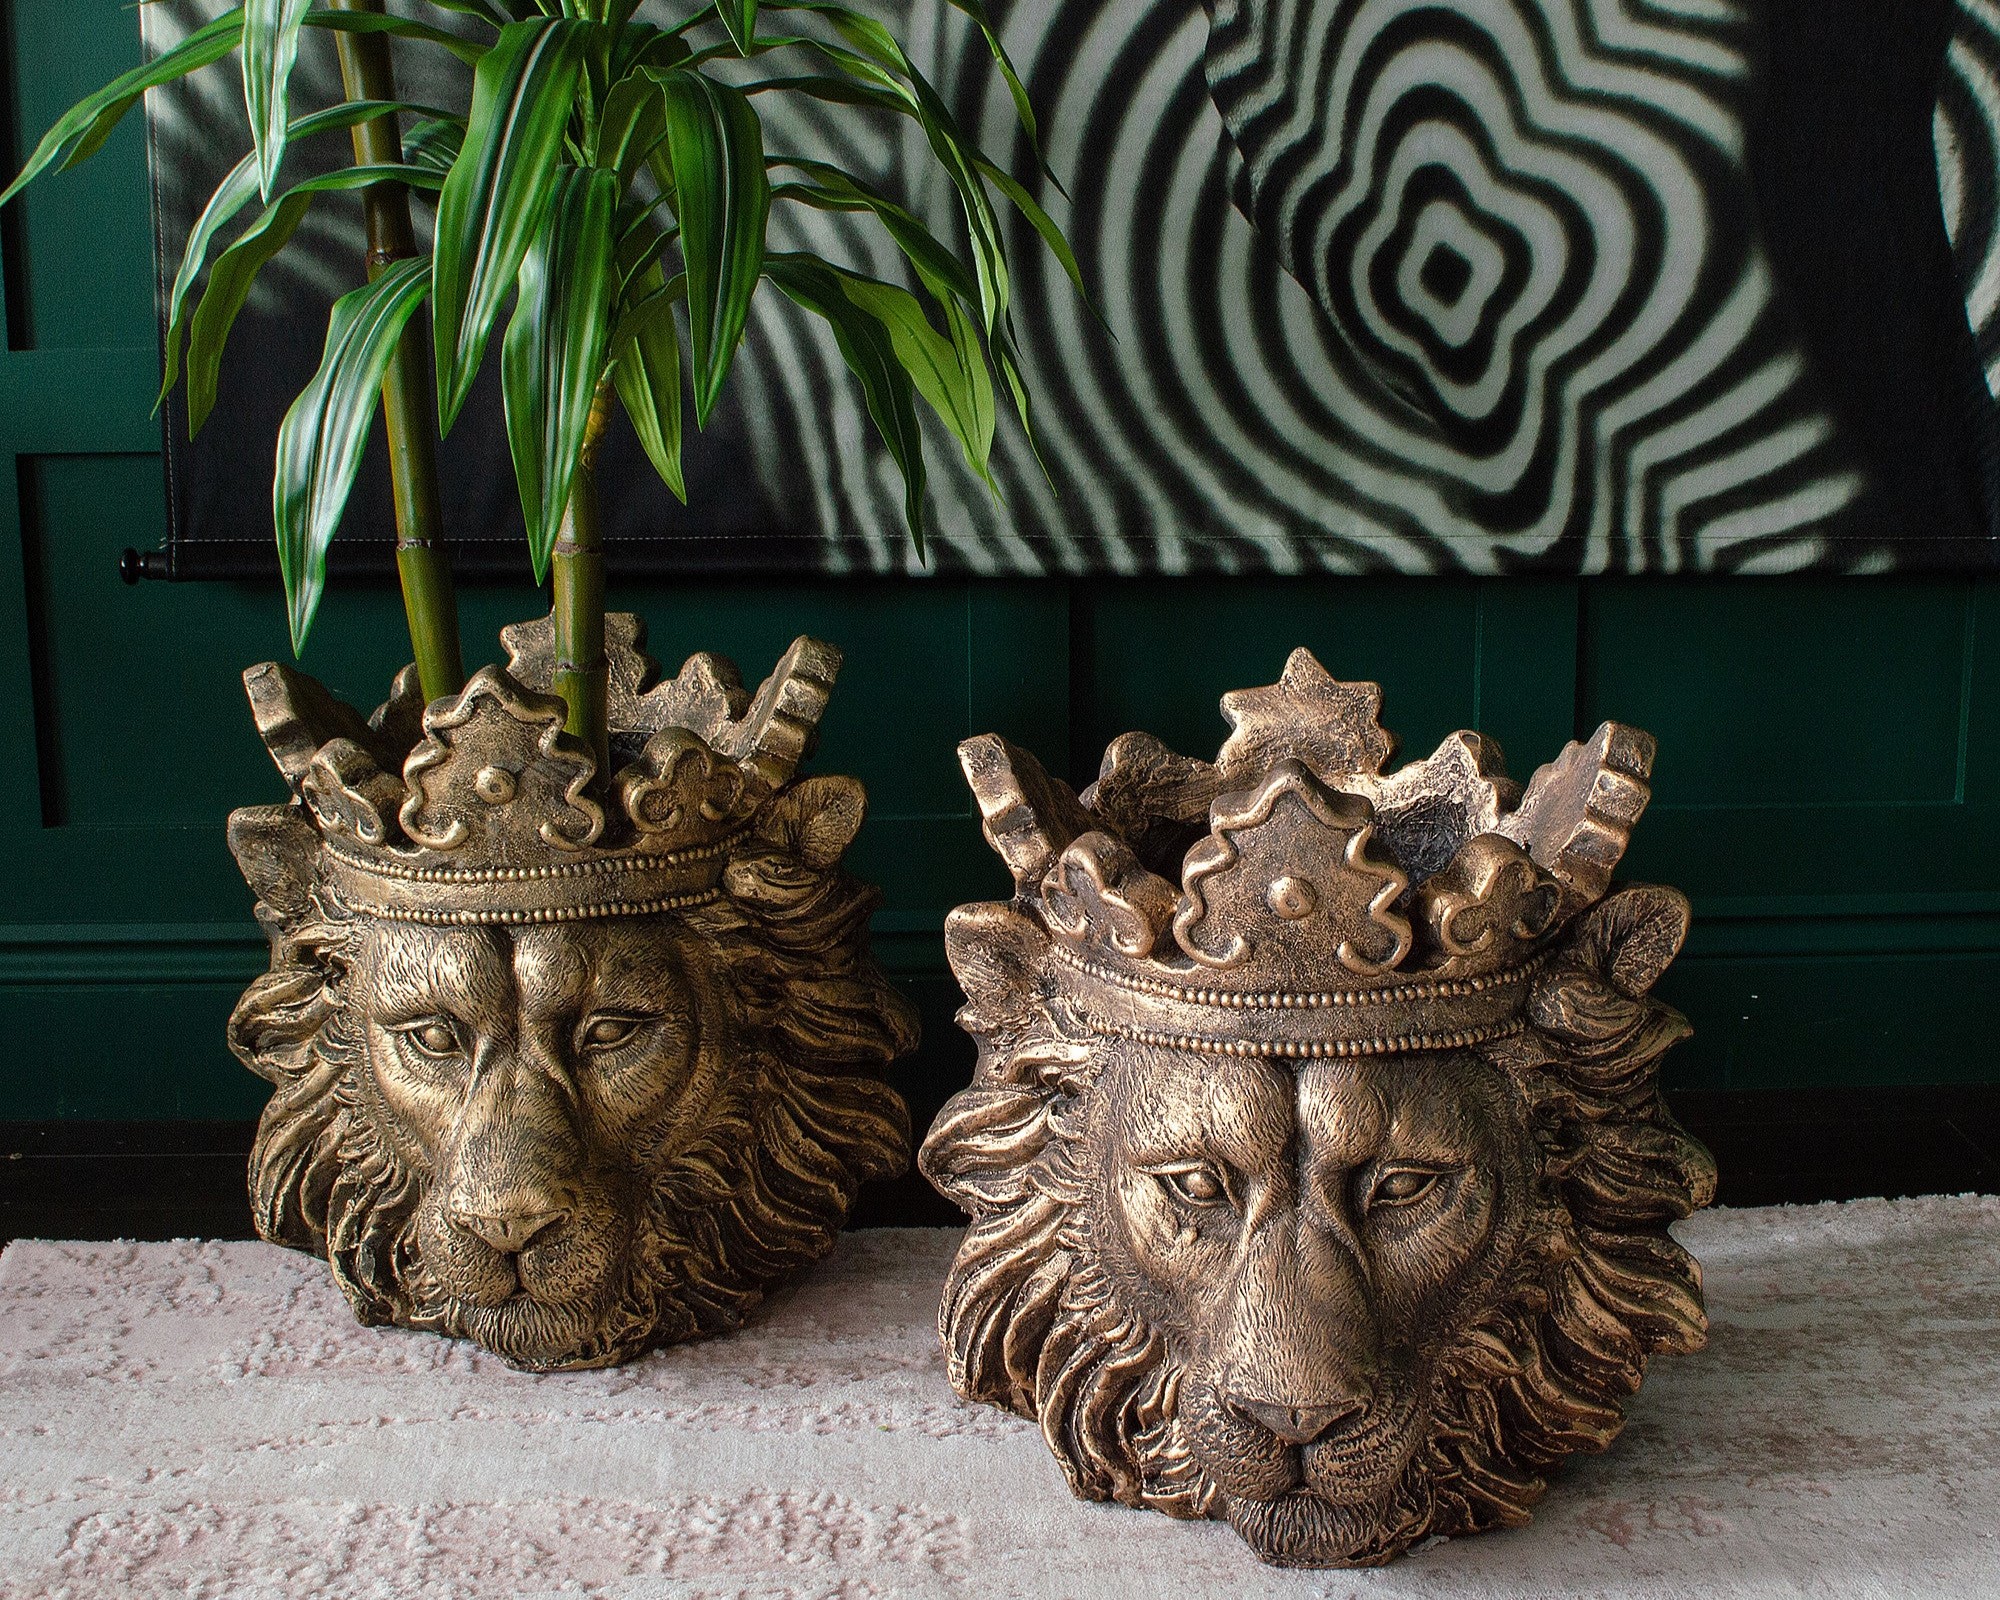 Two decorative lion head planters with crowns